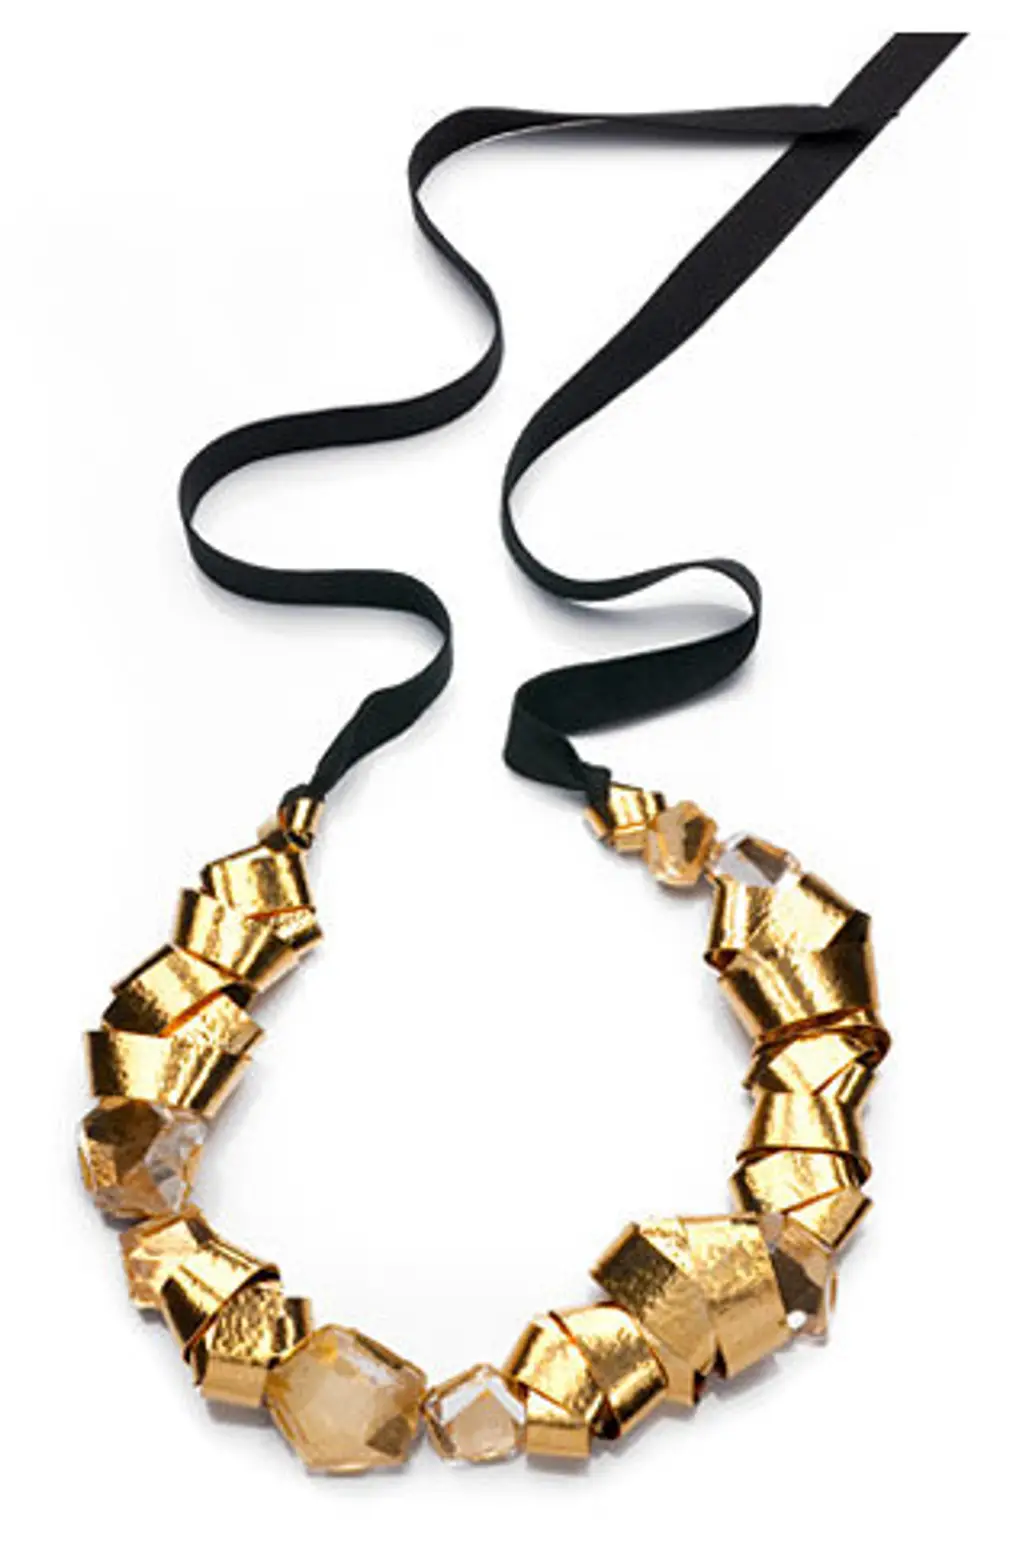 Hervé Van Der Straeten. Bow Wow Wow Necklace in Gilded Brass and Natural Rock Crystal